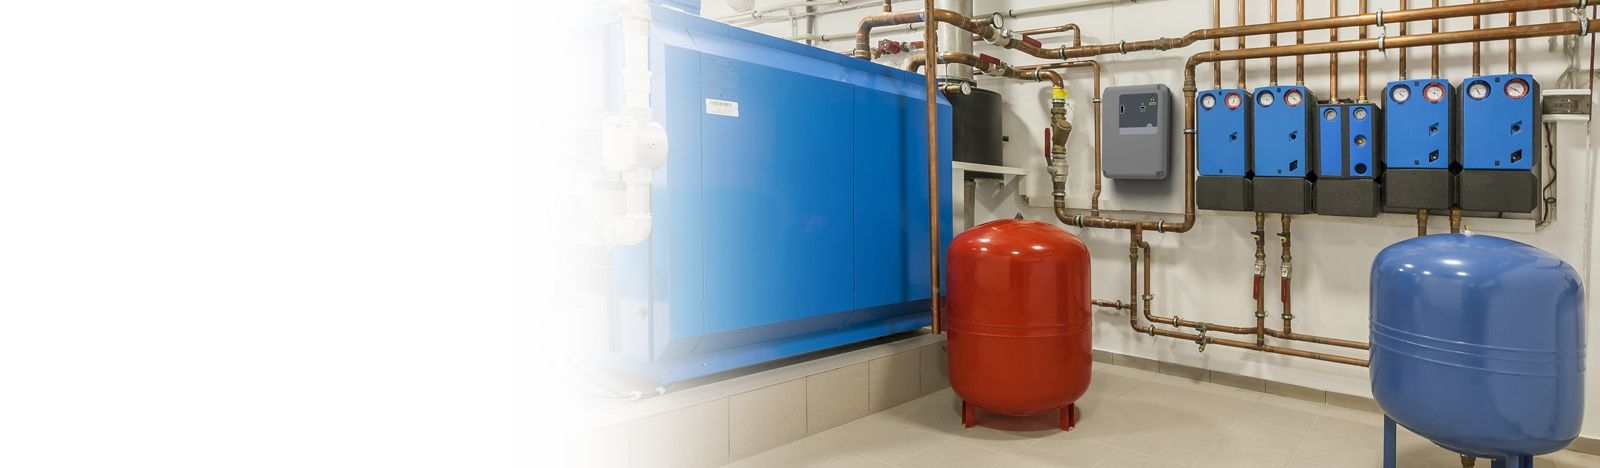 HeatingSave System with Boiler